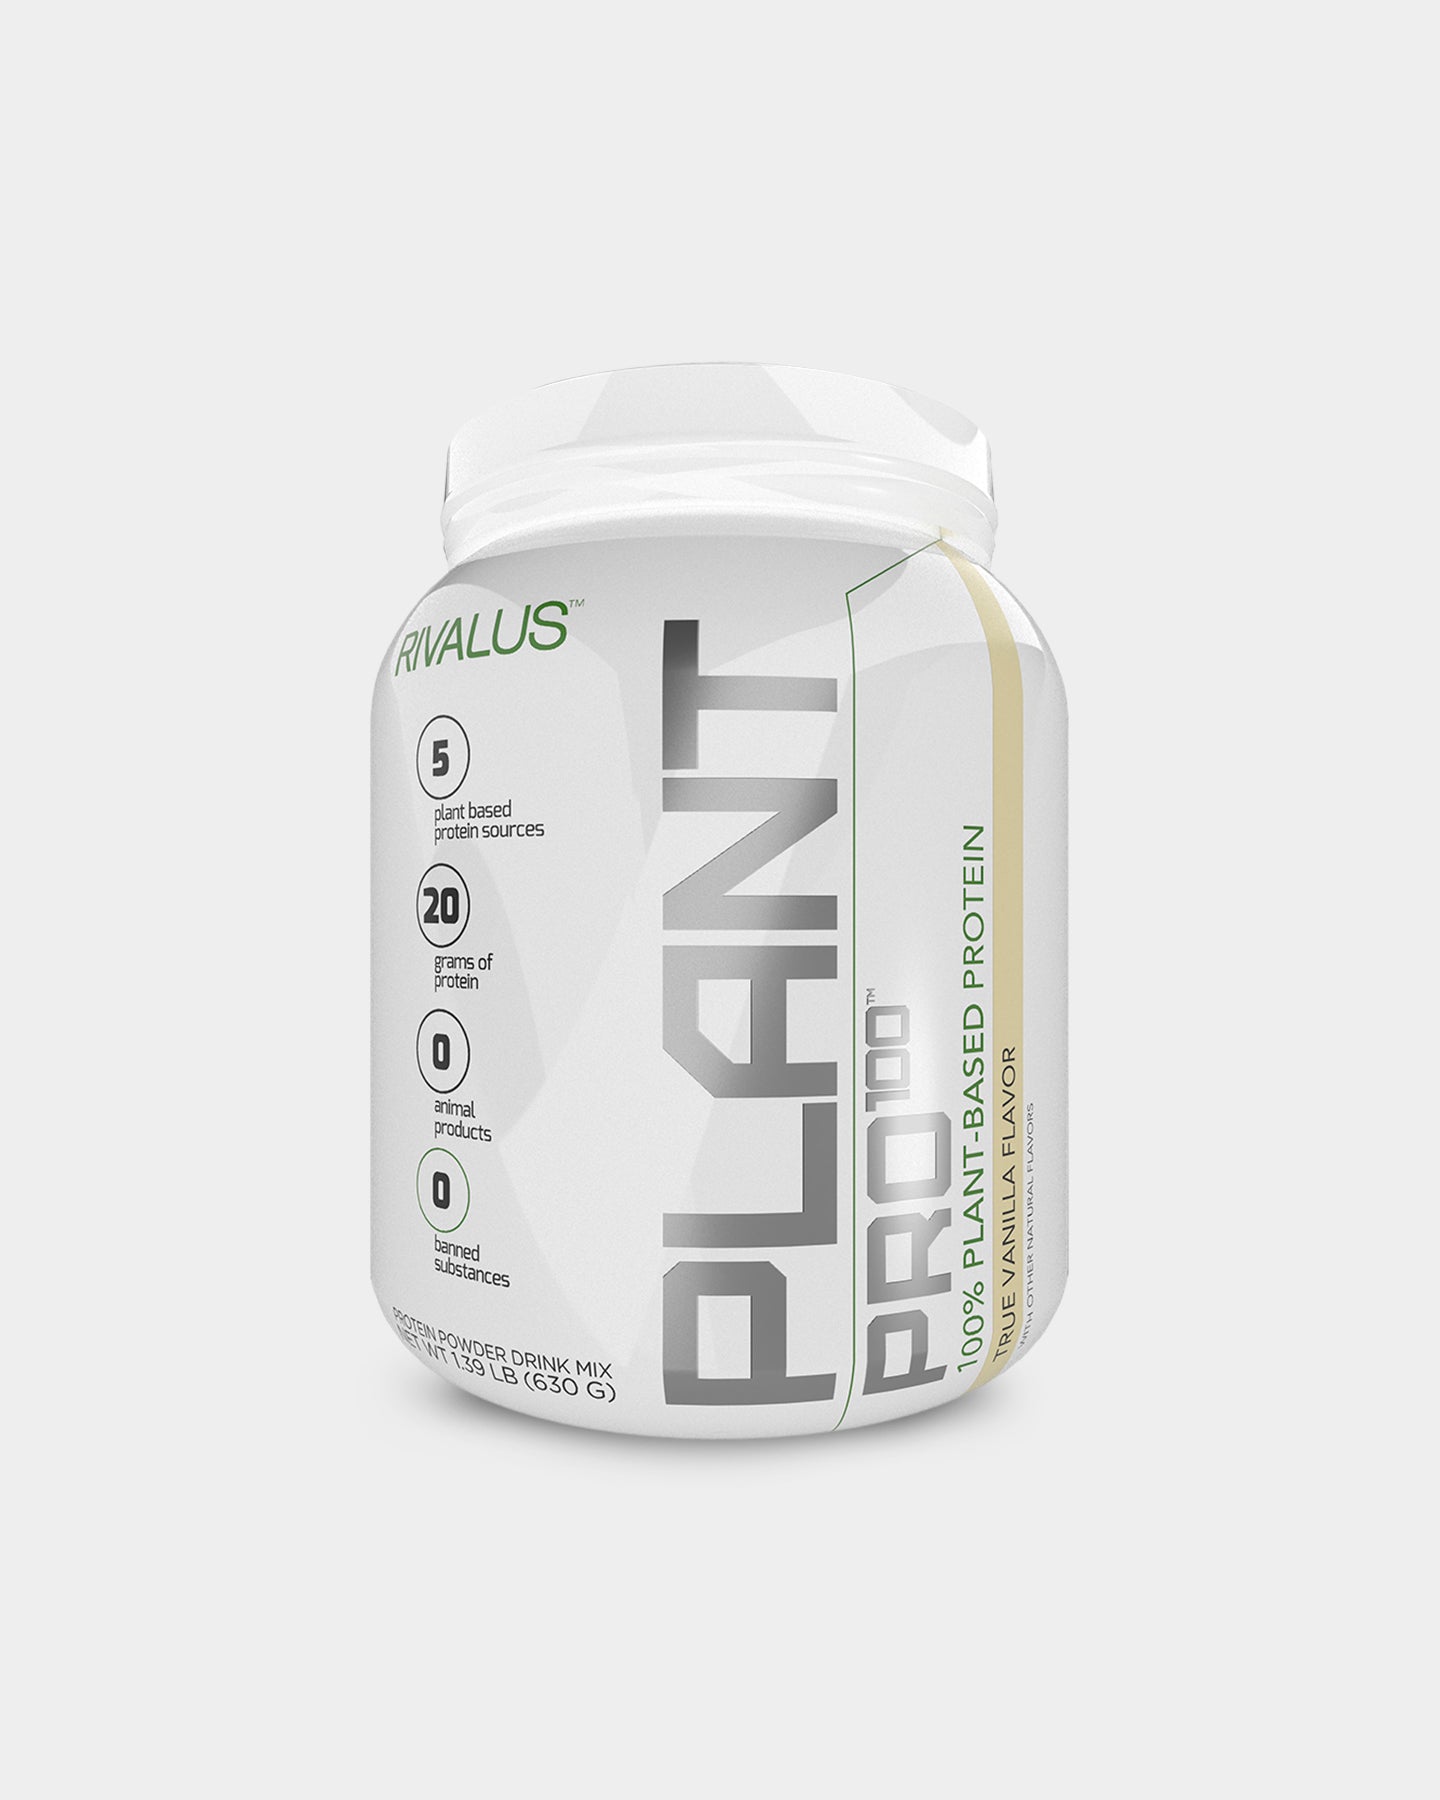 Image of RIVALUS Plant Pro 100